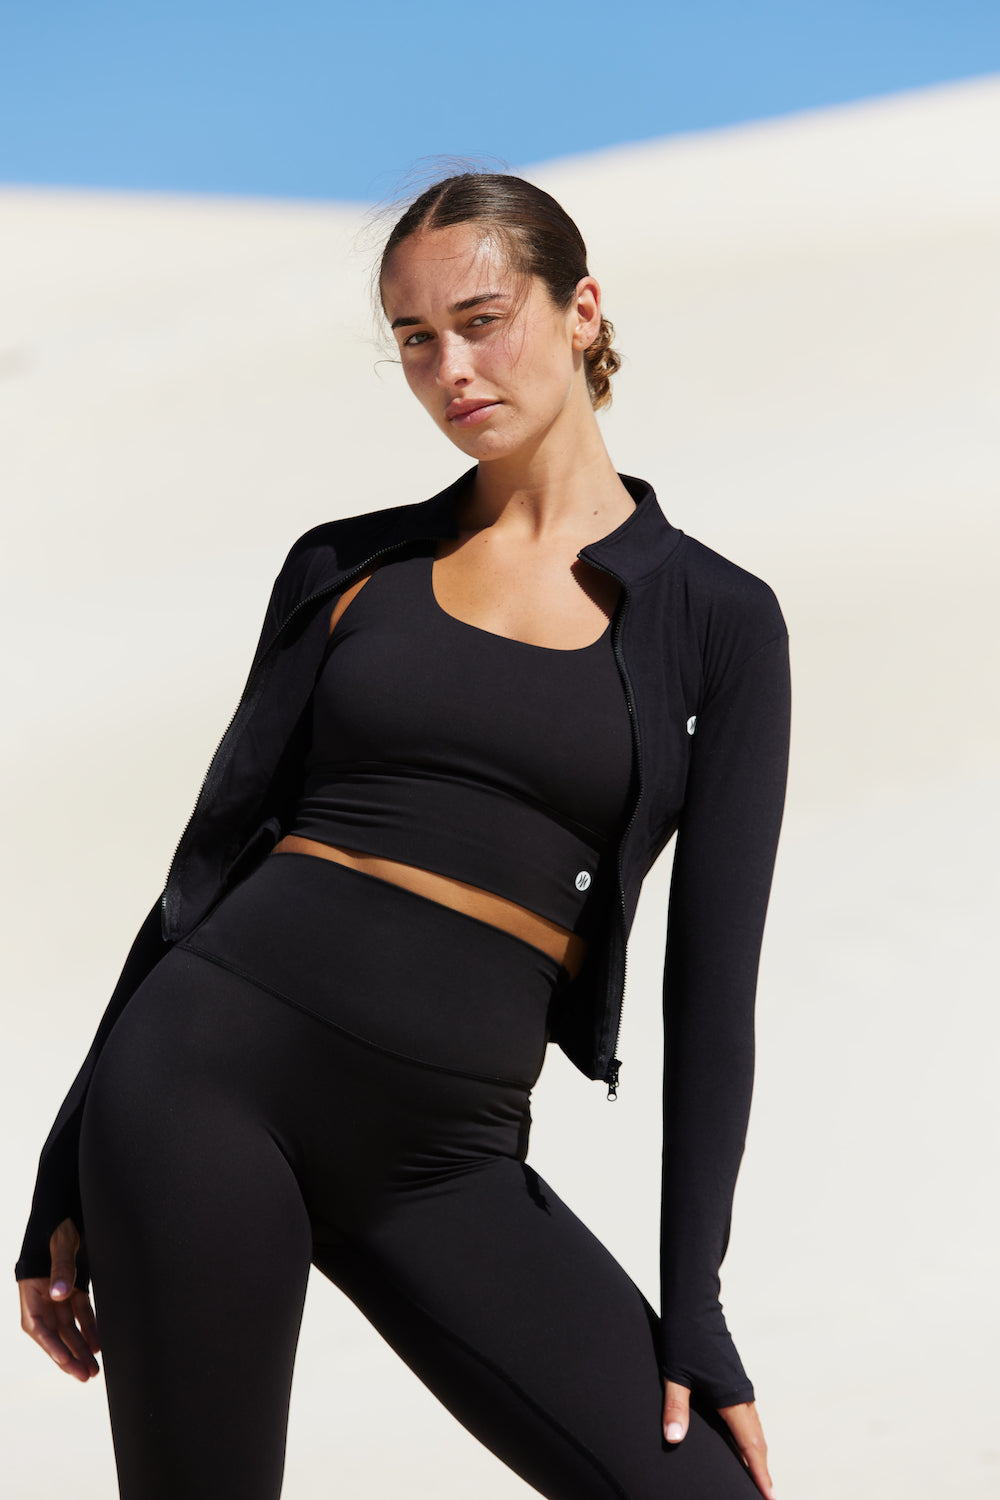 Balance Collection The Contender Lux Legging in Black